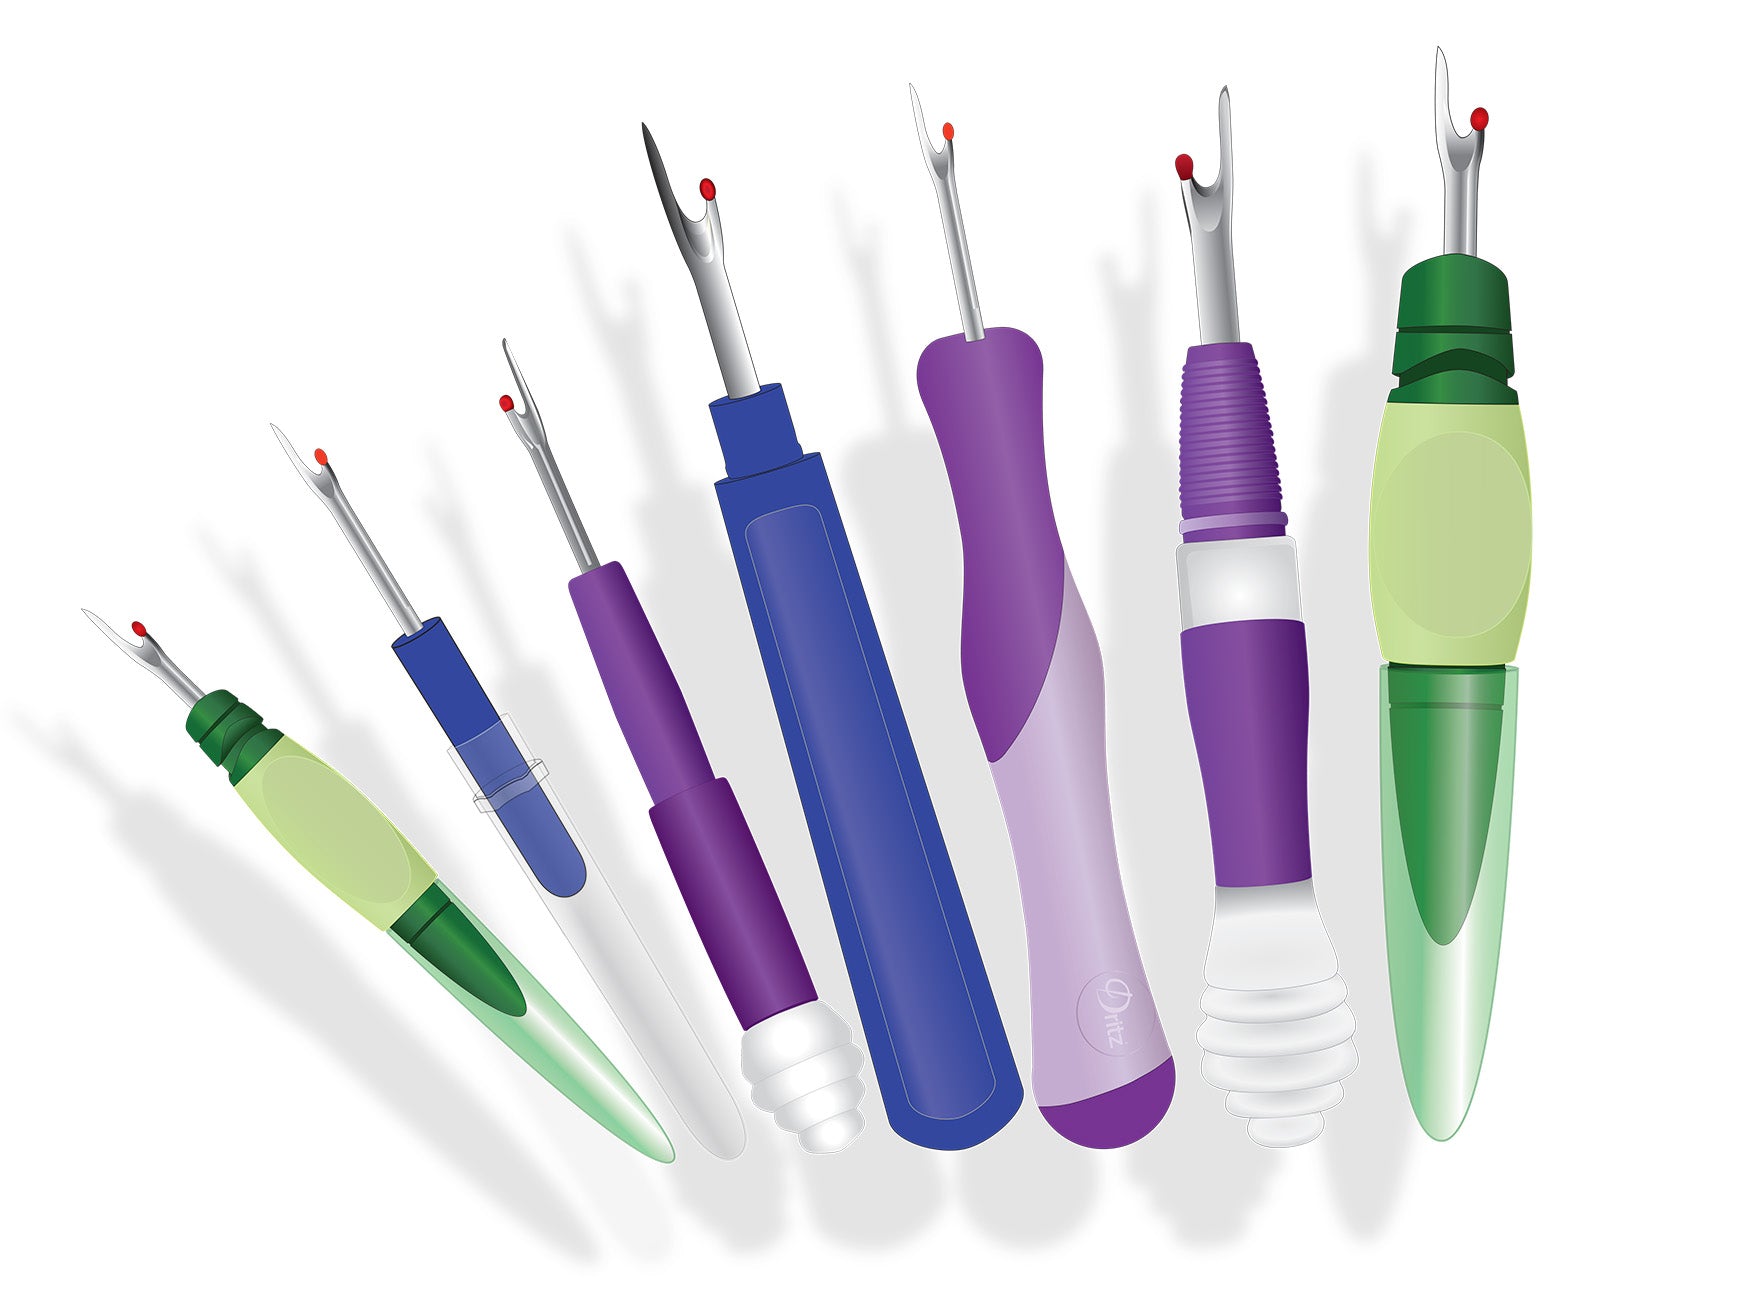 Notions and Tools: Picking the Perfect Seam Ripper - Fabric Ninja